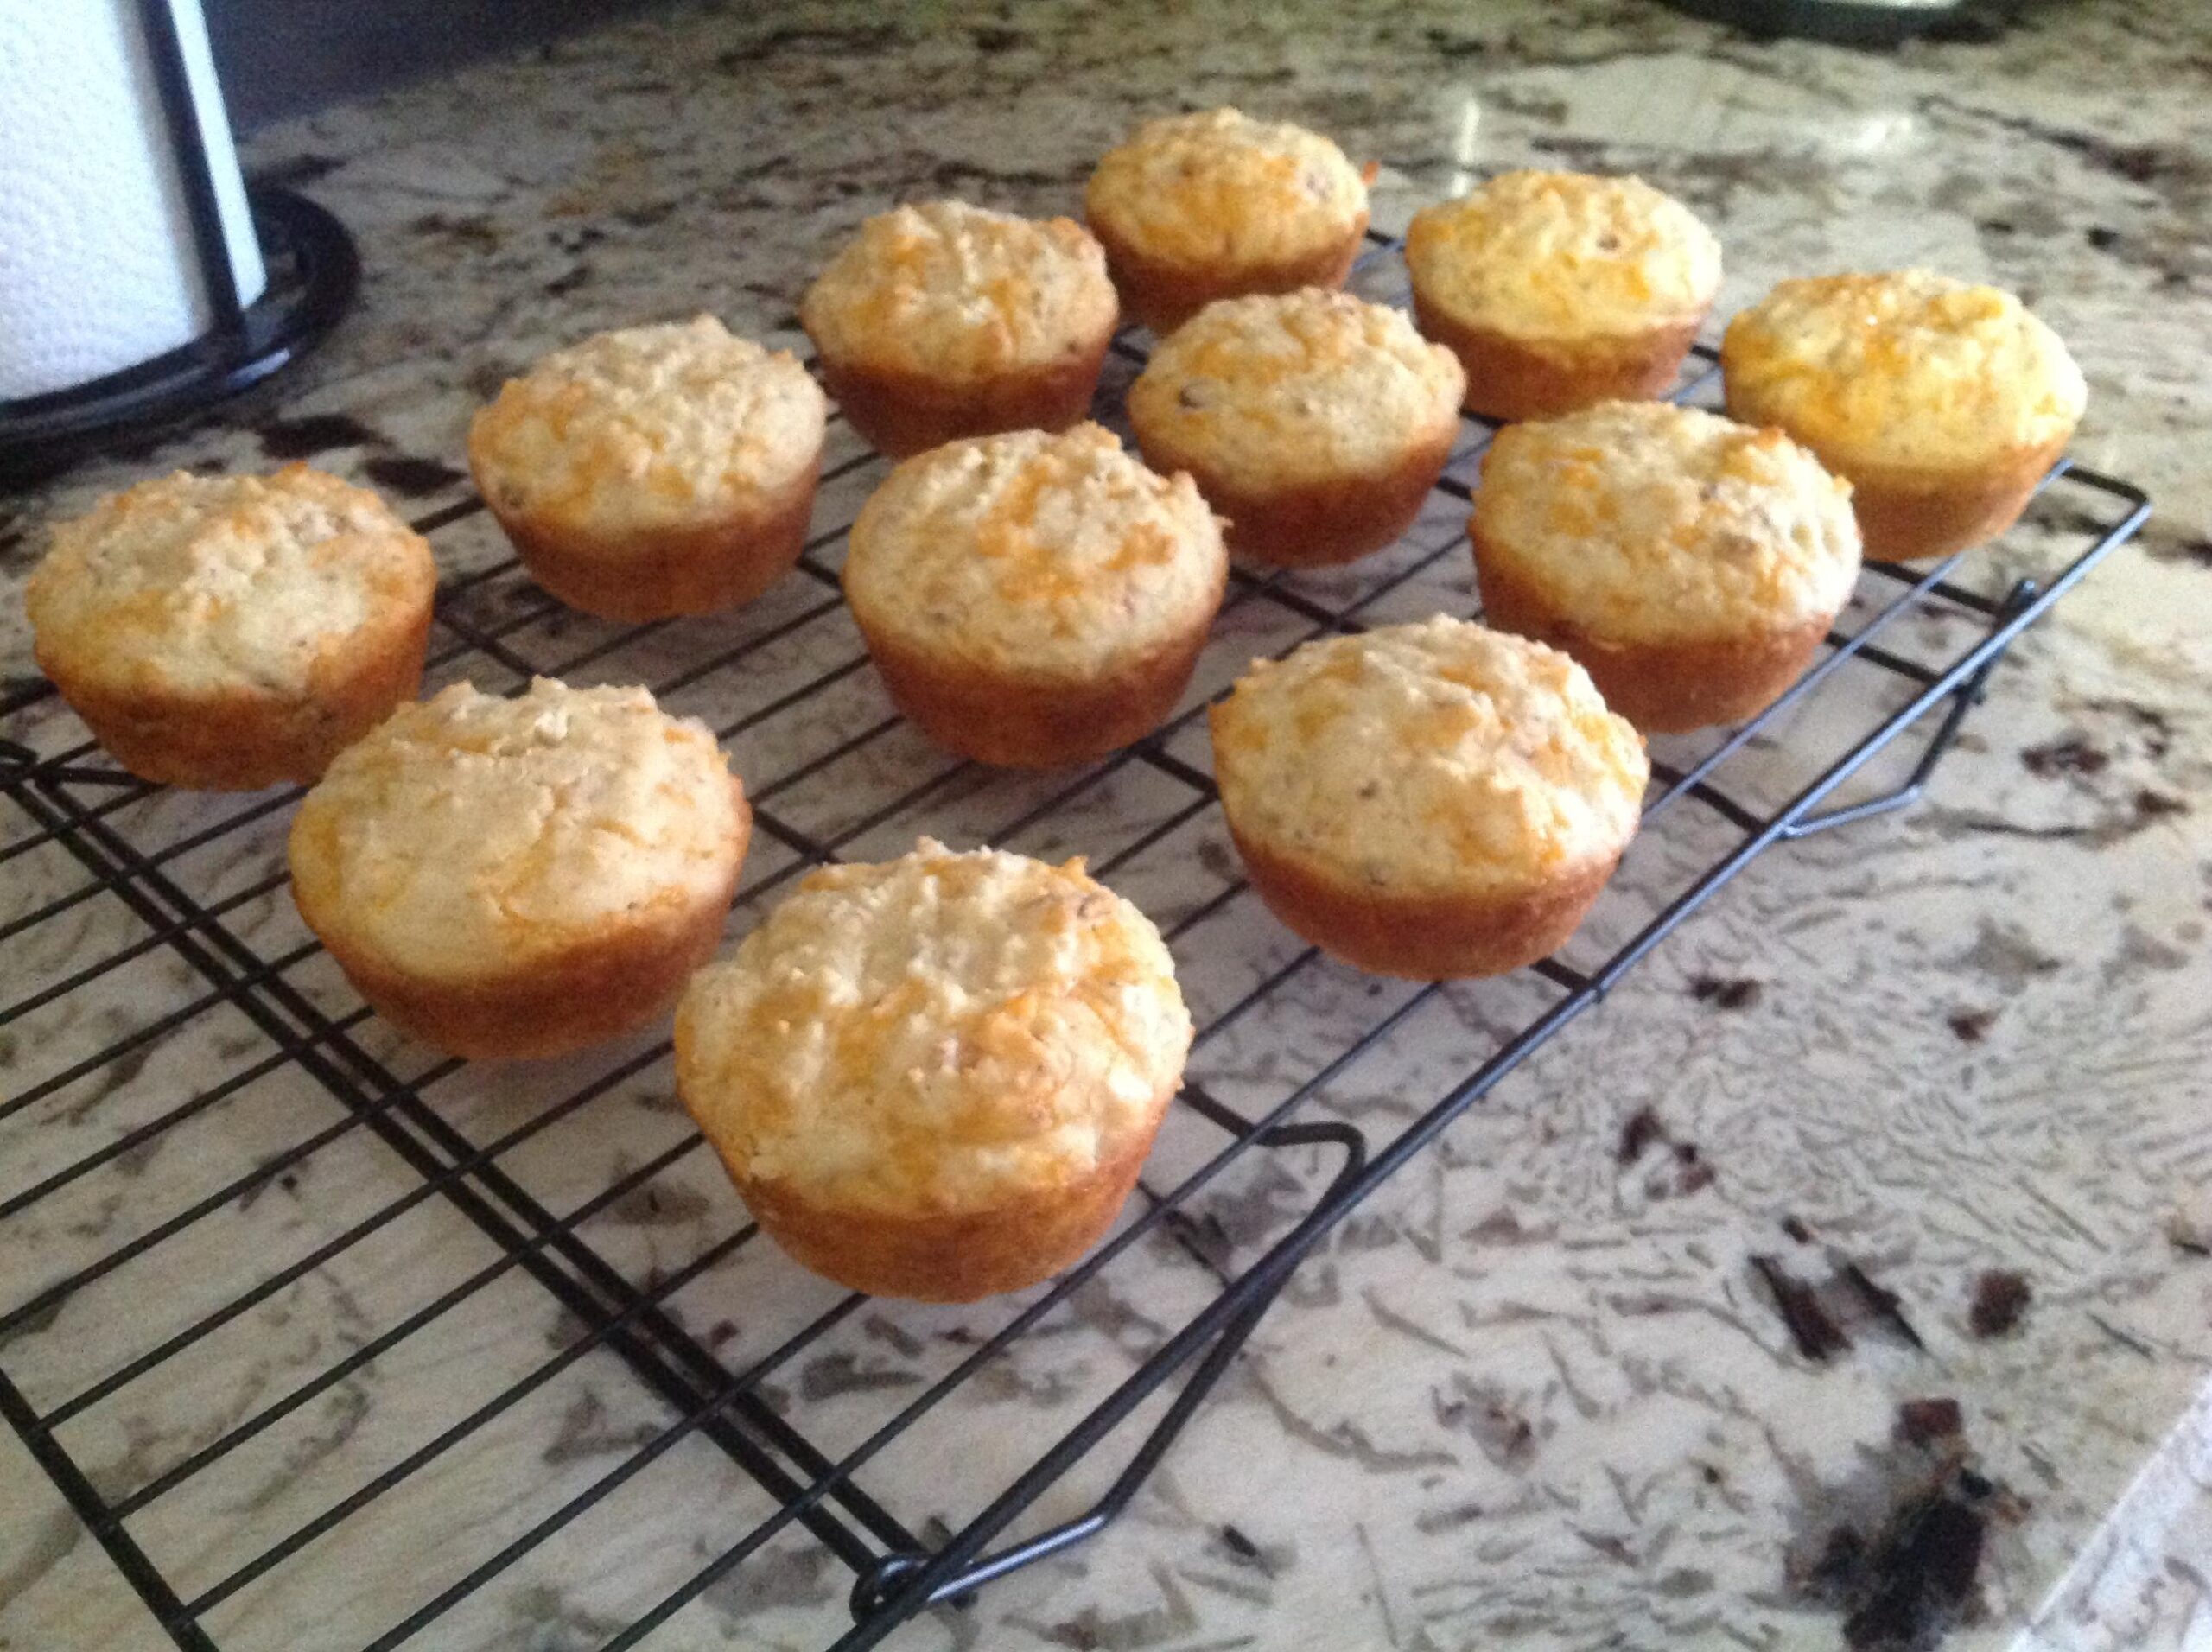  These gluten-free cheese muffins are the perfect savory snack!